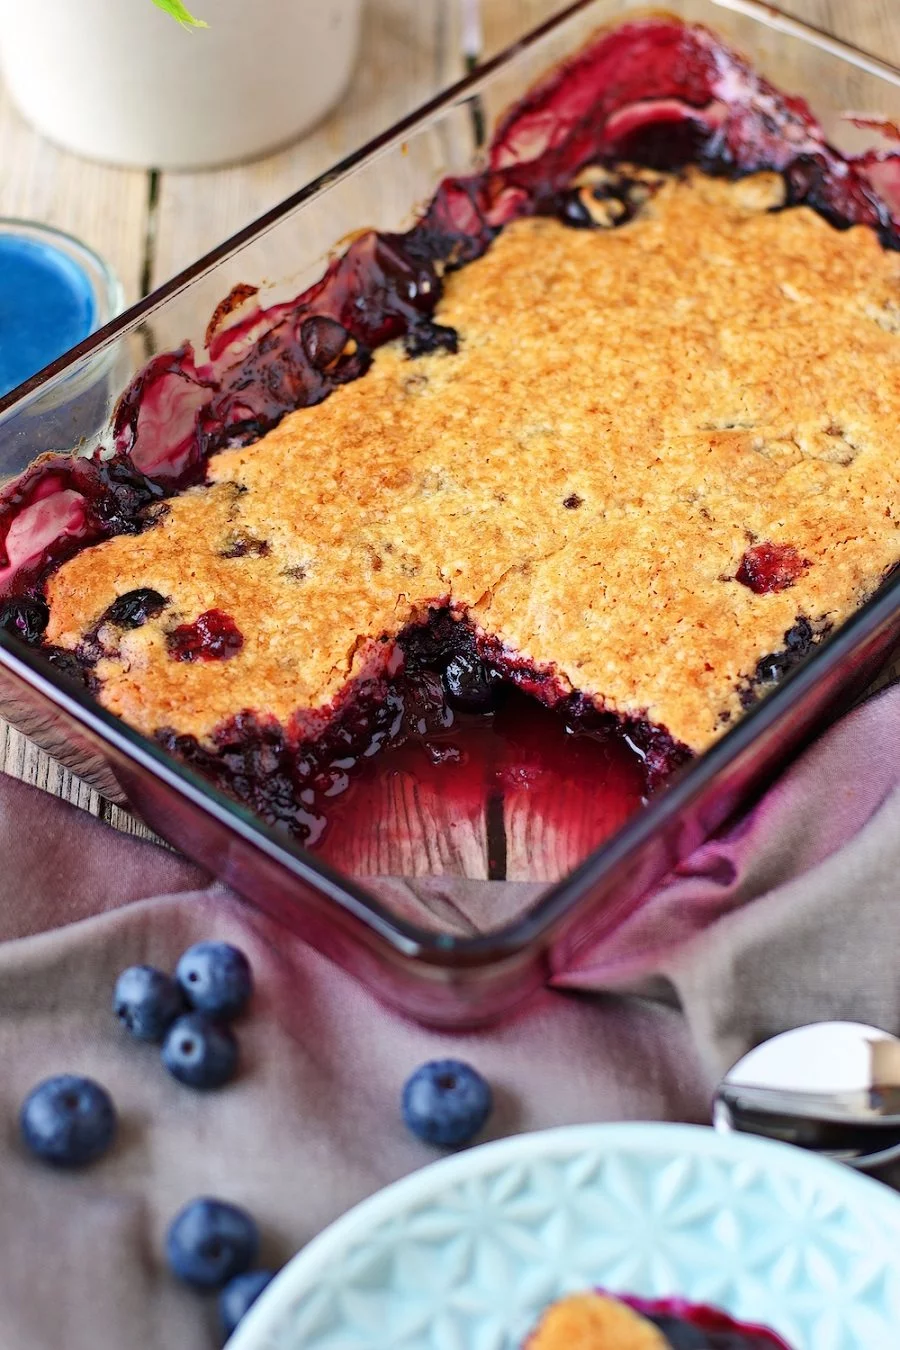 Closeup on the Easy Blueberry Cobbler in the casserole dish, showing the juicy fruit mix and crunchy top.